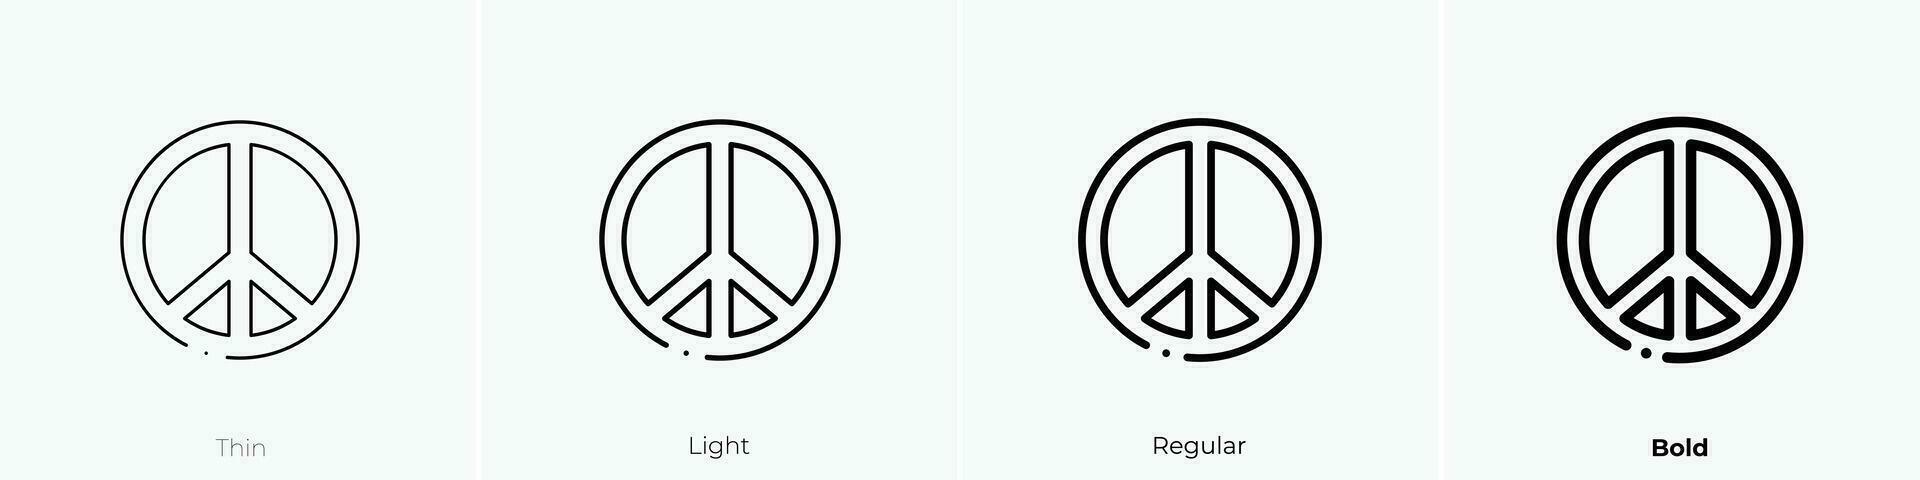 peace icon. Thin, Light, Regular And Bold style design isolated on white background vector